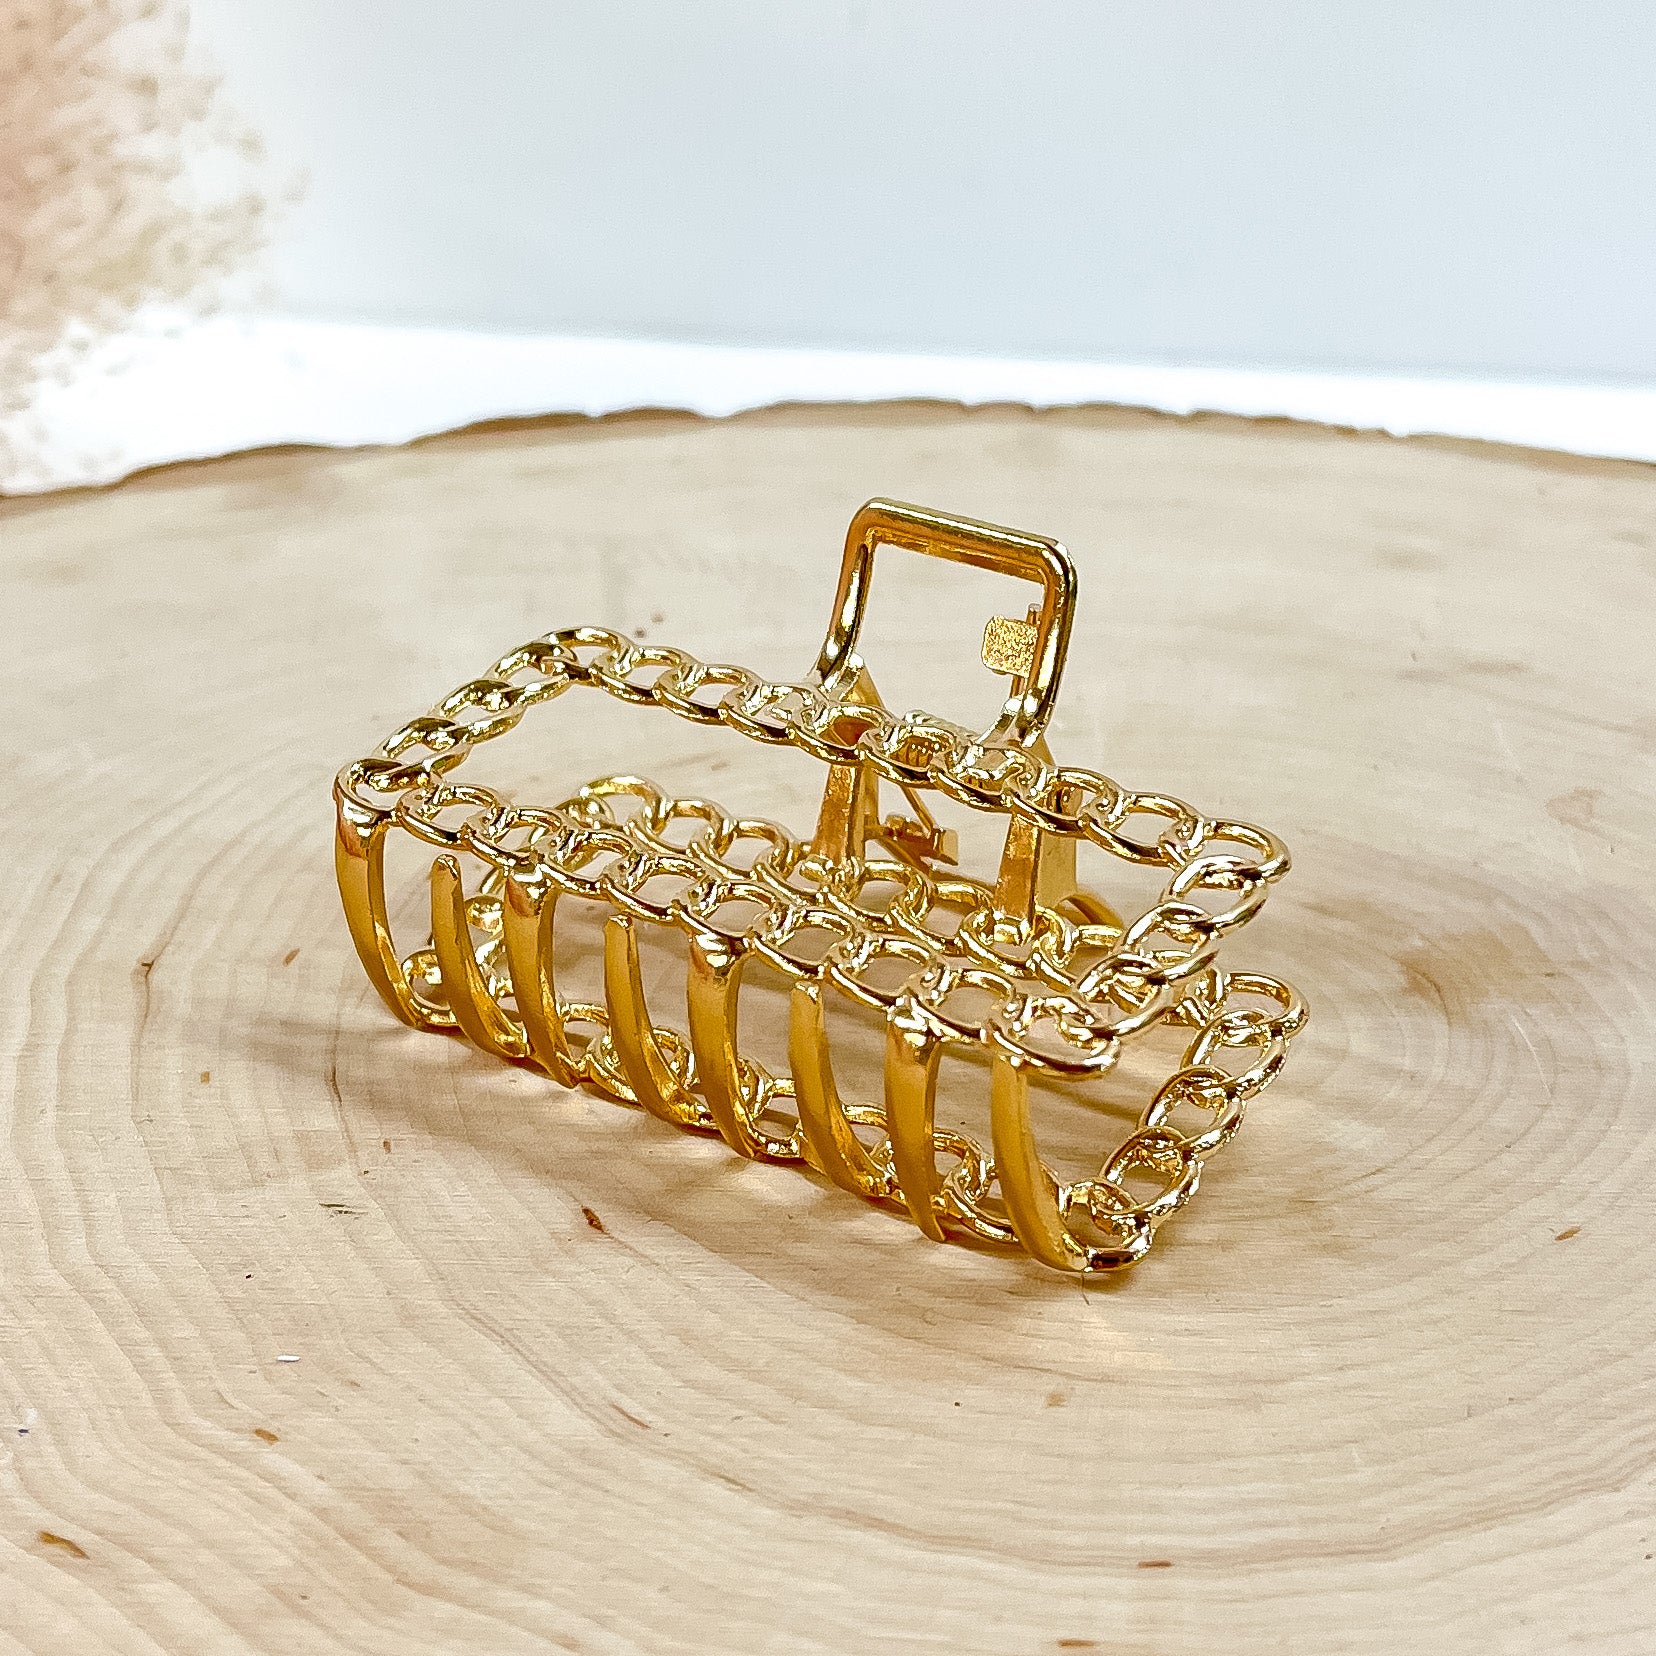 This is a small rectangle shaped hair clip with chain texture in gold. This hair  clip is laying on a slab of wood with a beige plant in the side as decor.